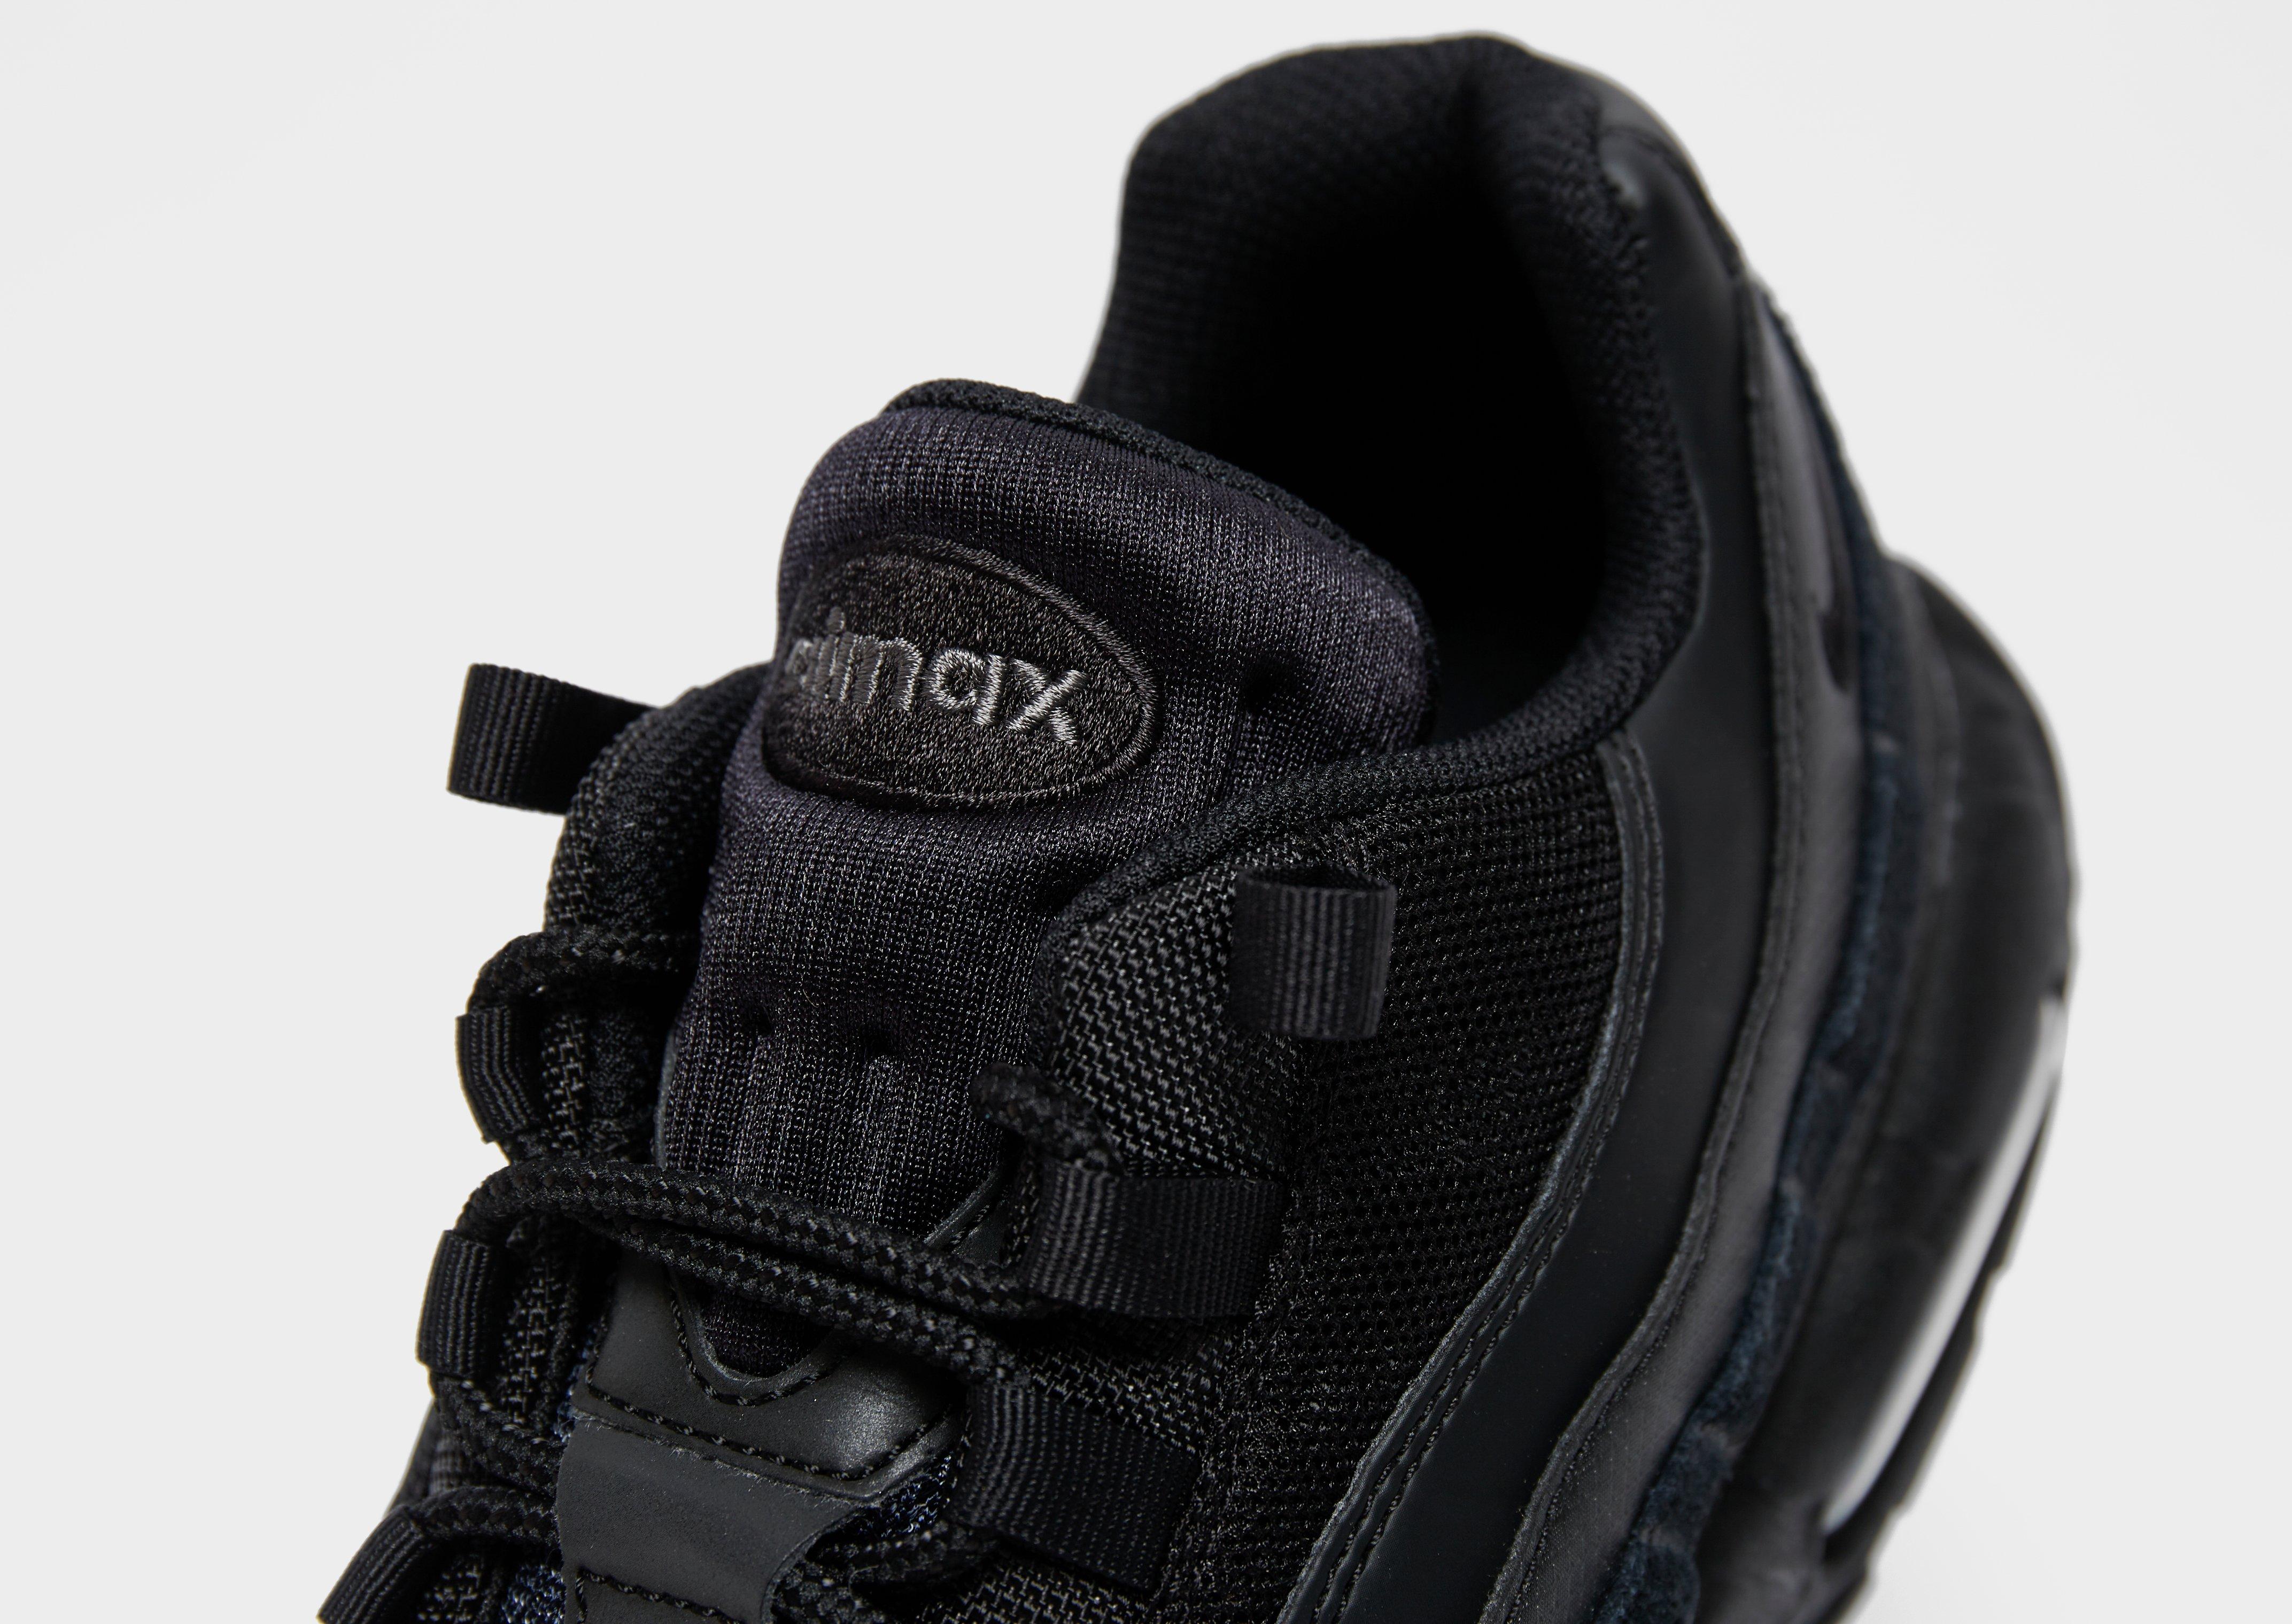 air max 95 all black leather